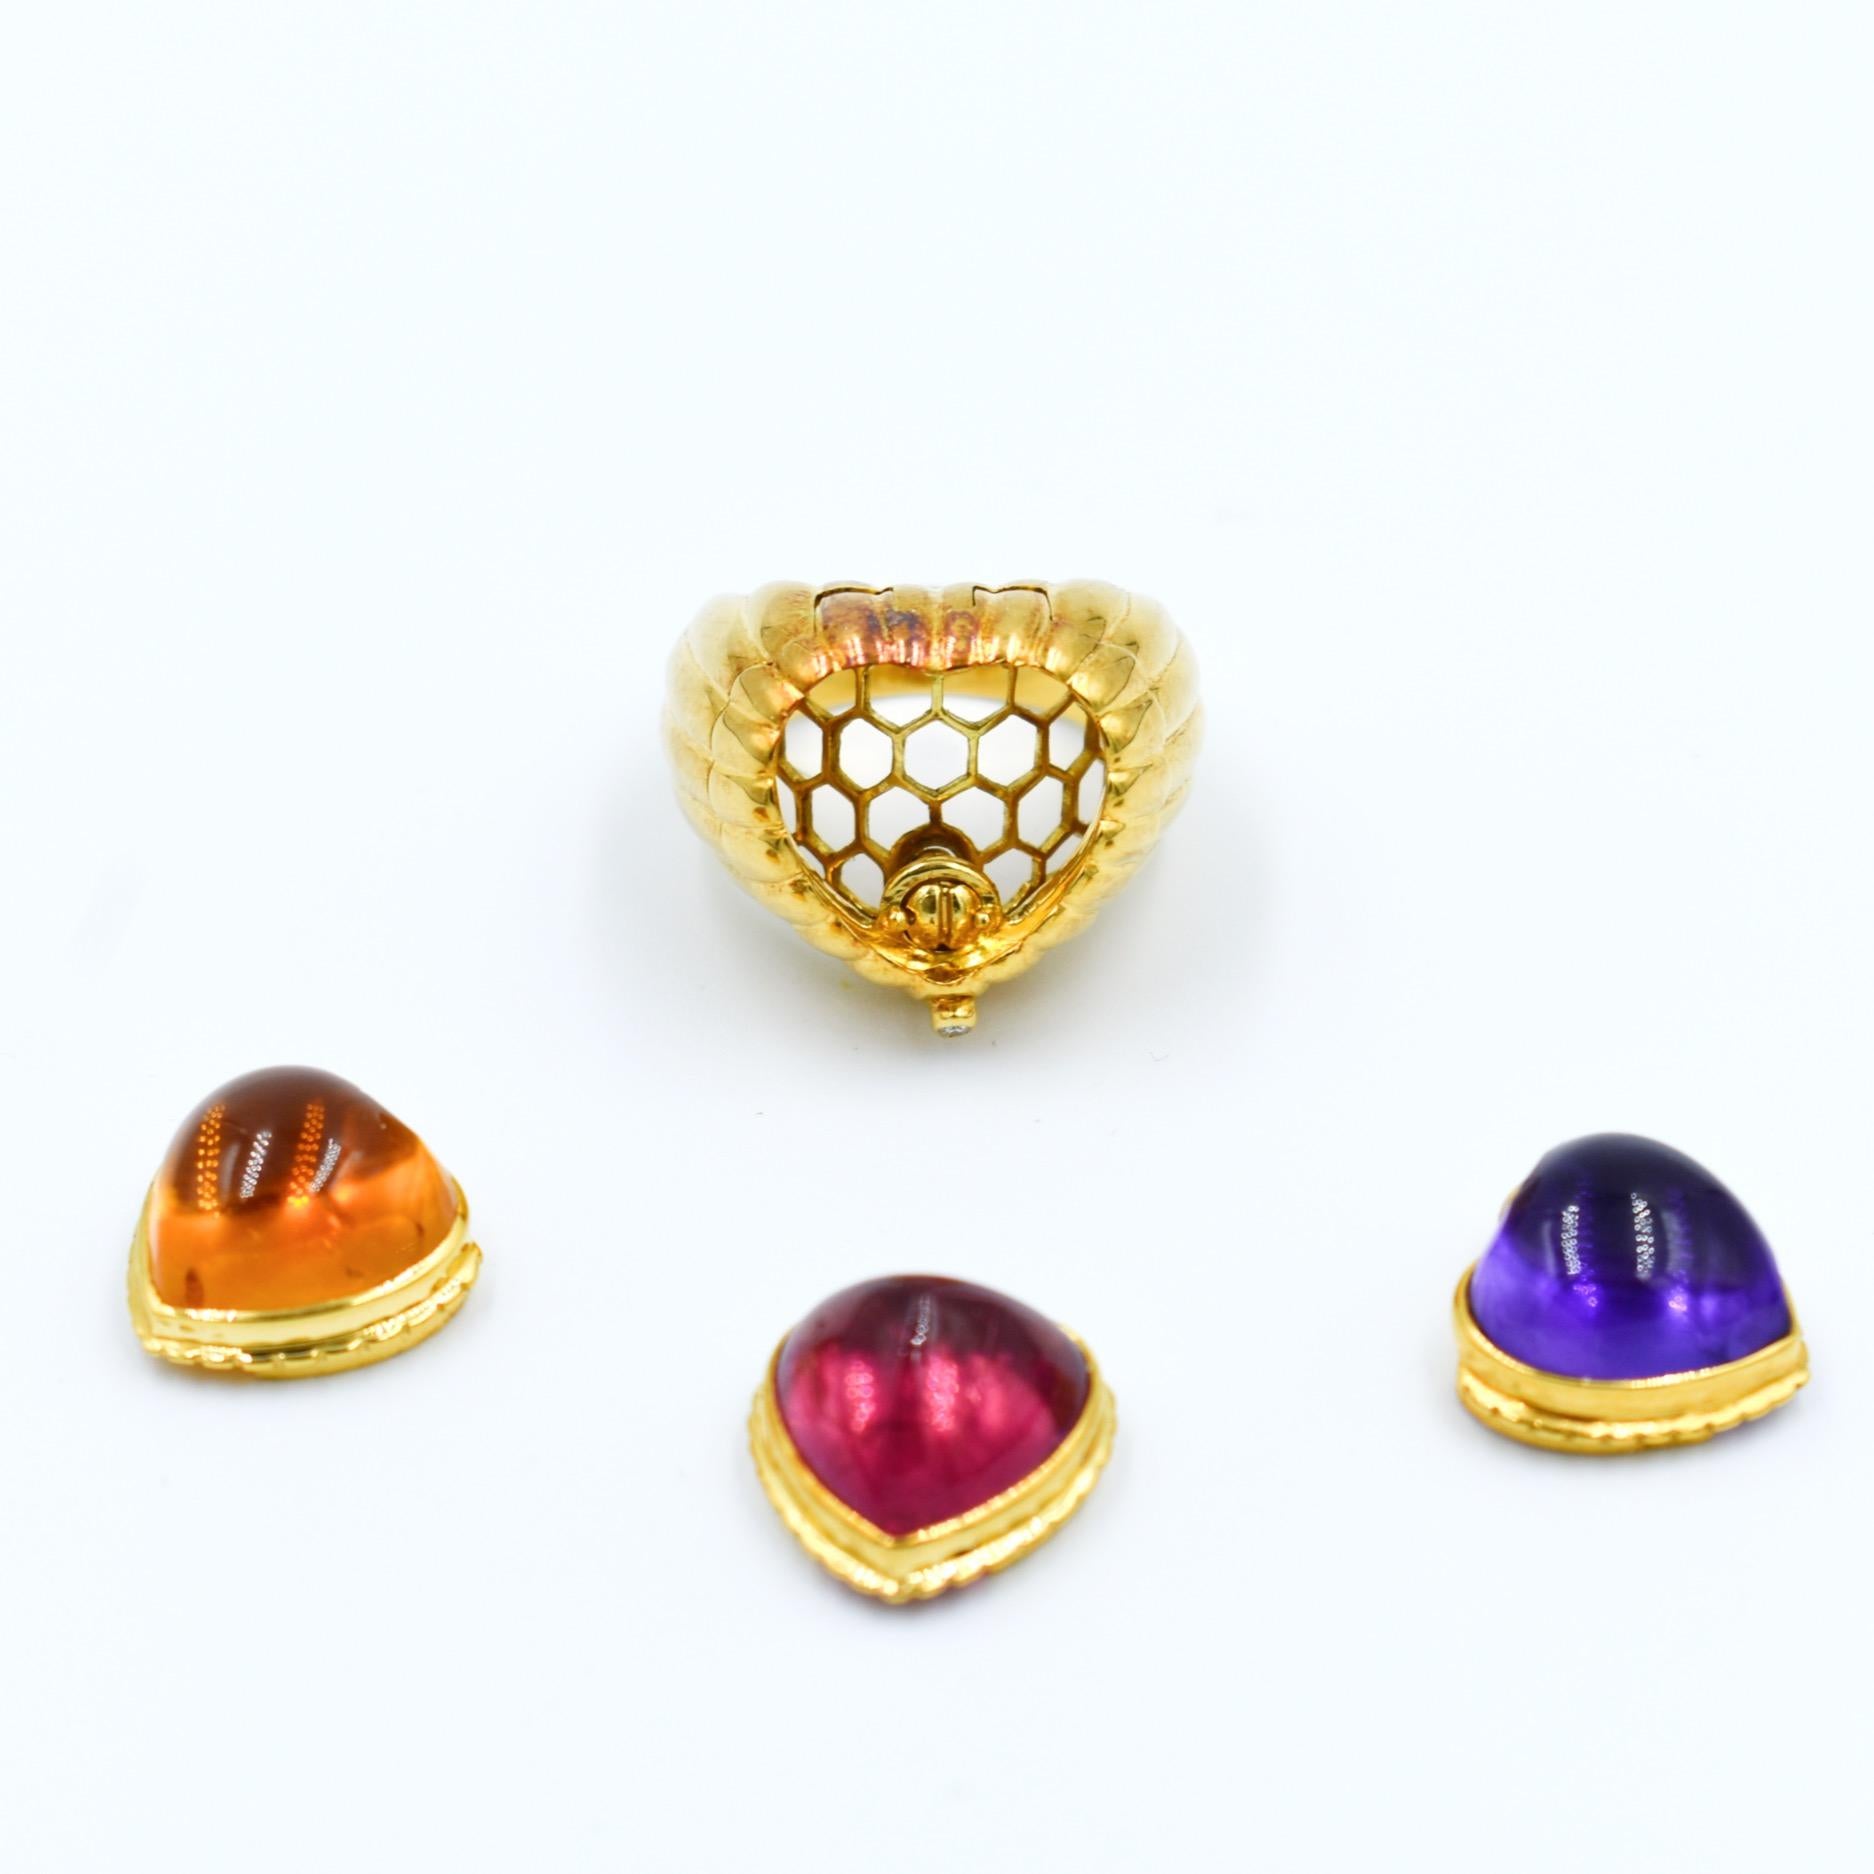 Modular 3-in-1 Heart Ring in Gold with Amethyst, Citrine, Tourmaline Cabochons For Sale 4